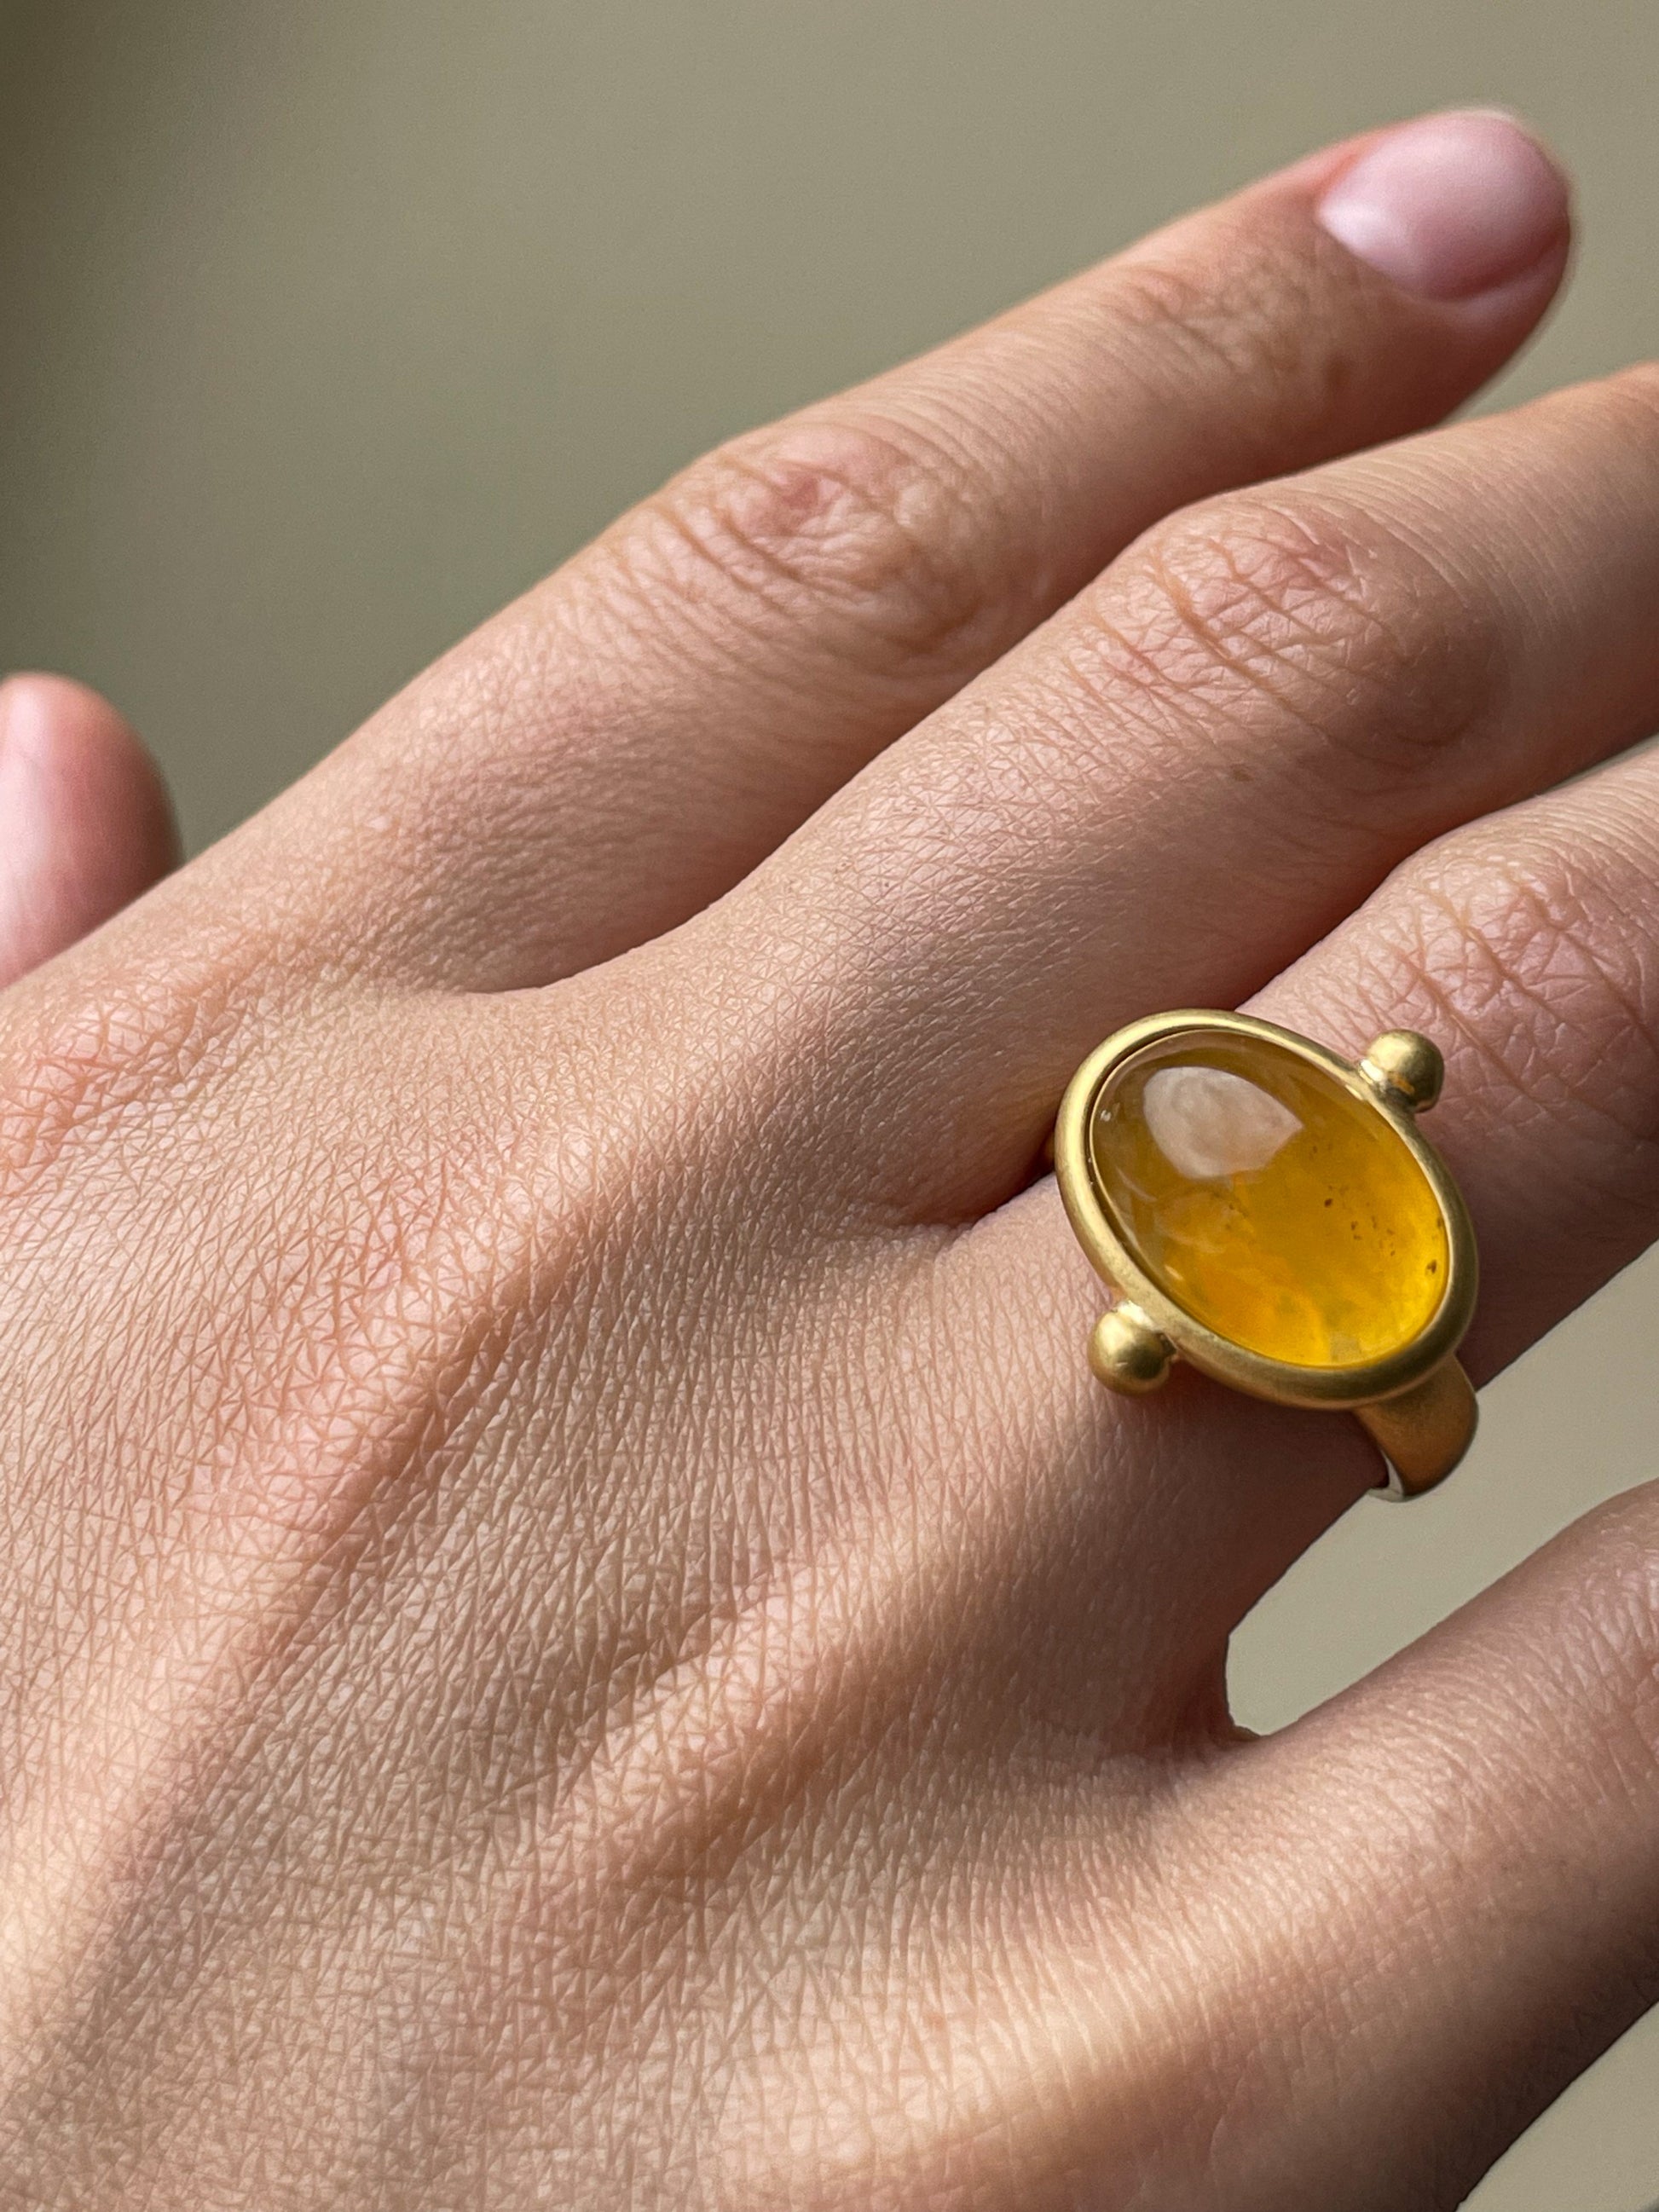 Honey amber ring - Gold plated silver - Vintage ring collection 